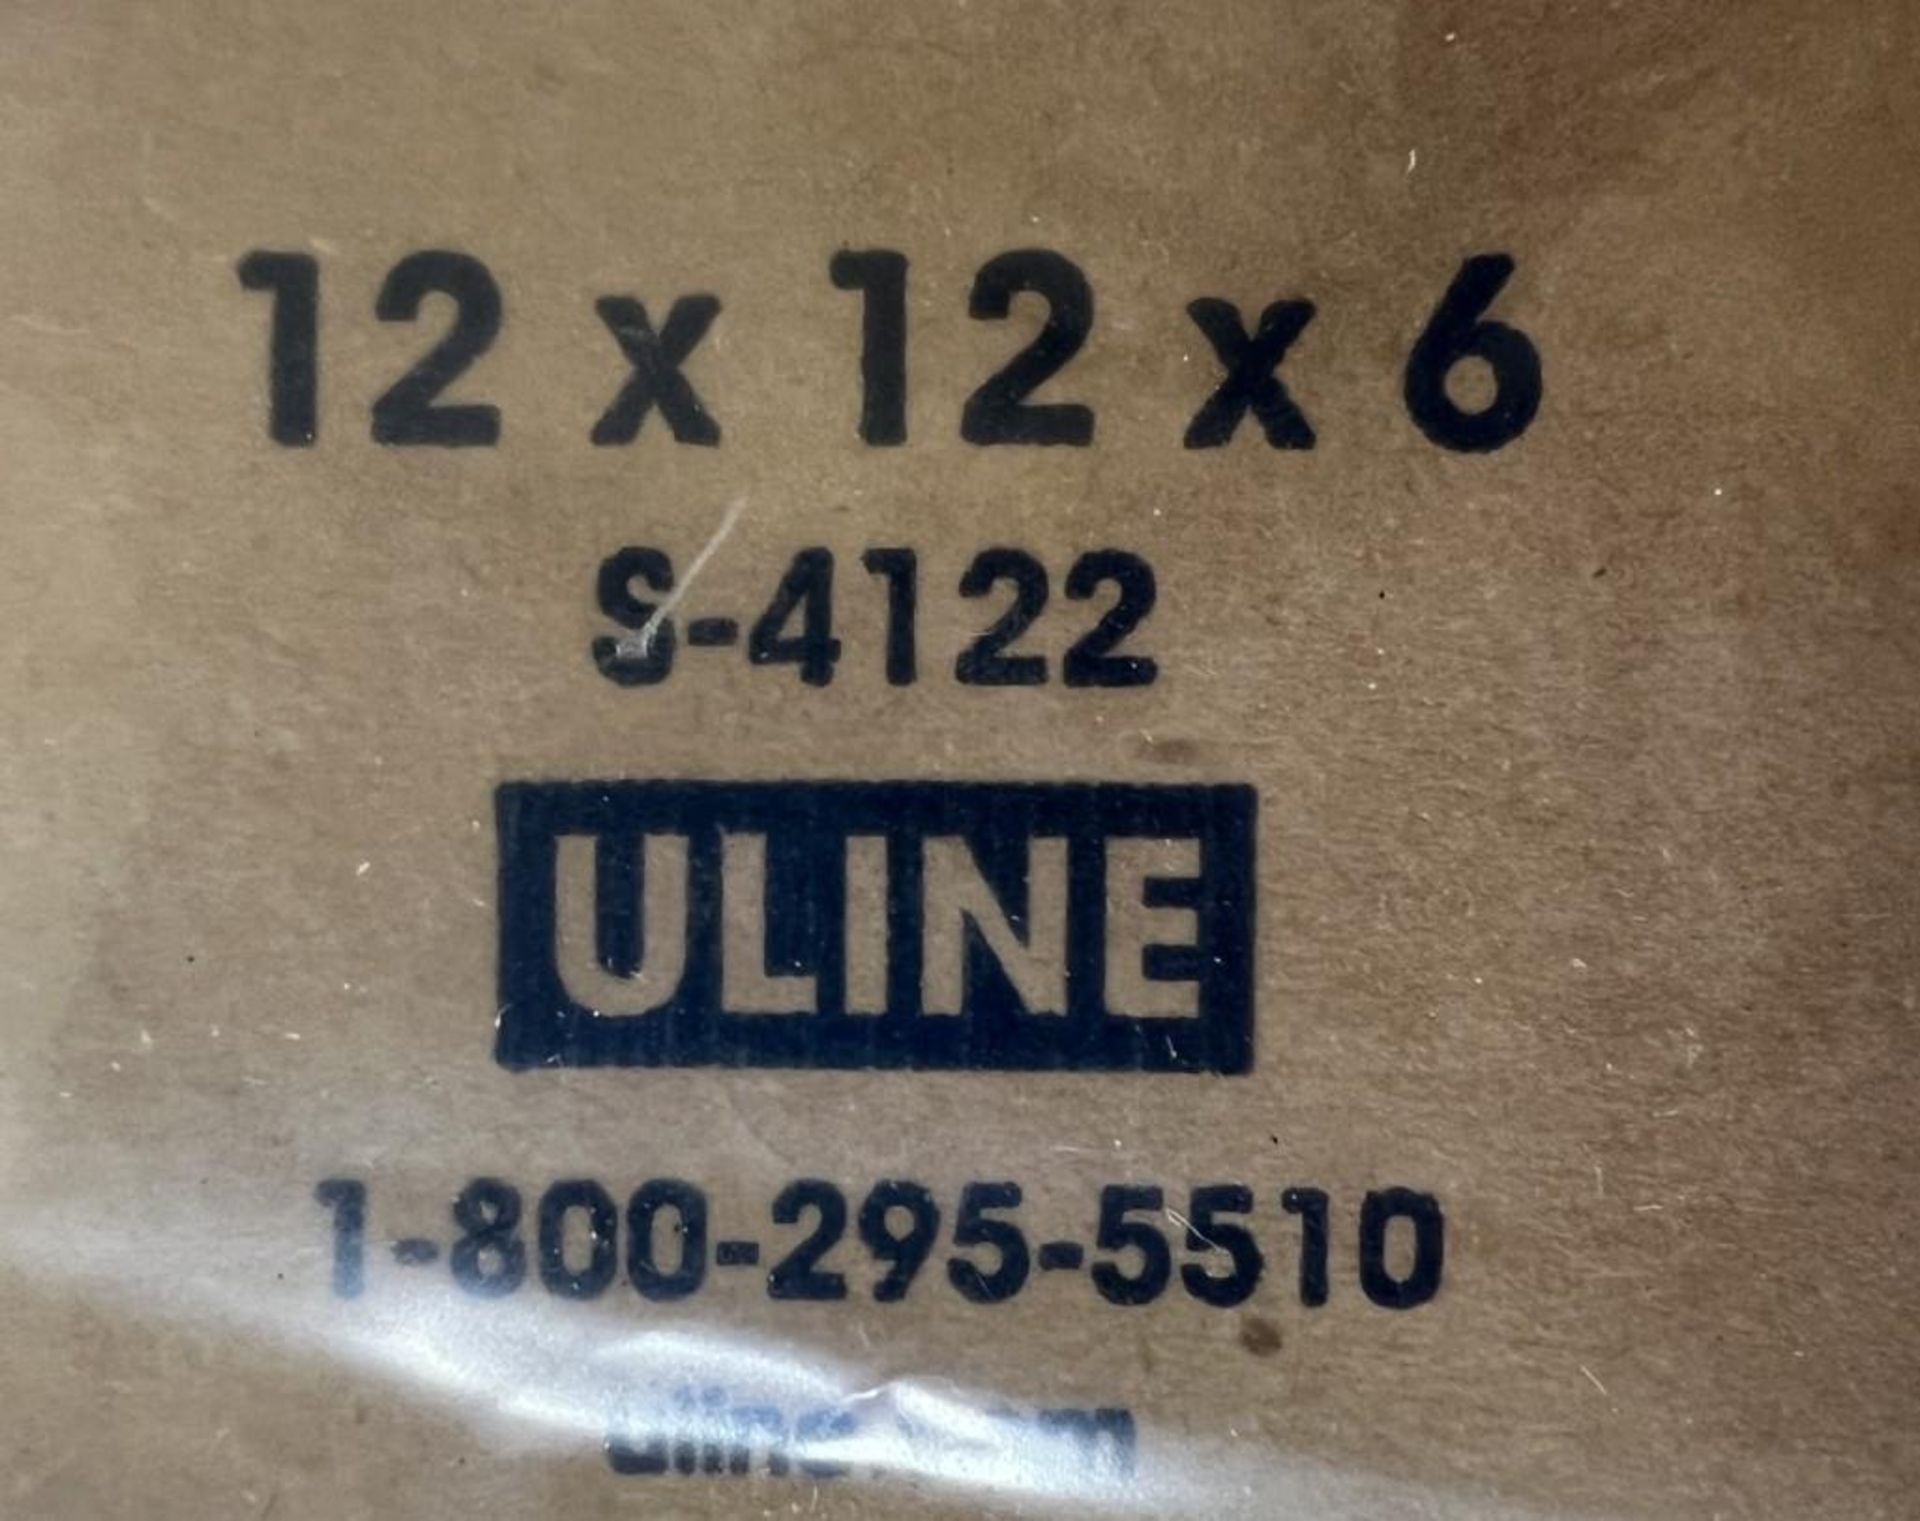 Lot Of Uline 12x12x6 Cardboard Boxes, Model S-4122. - Image 3 of 3